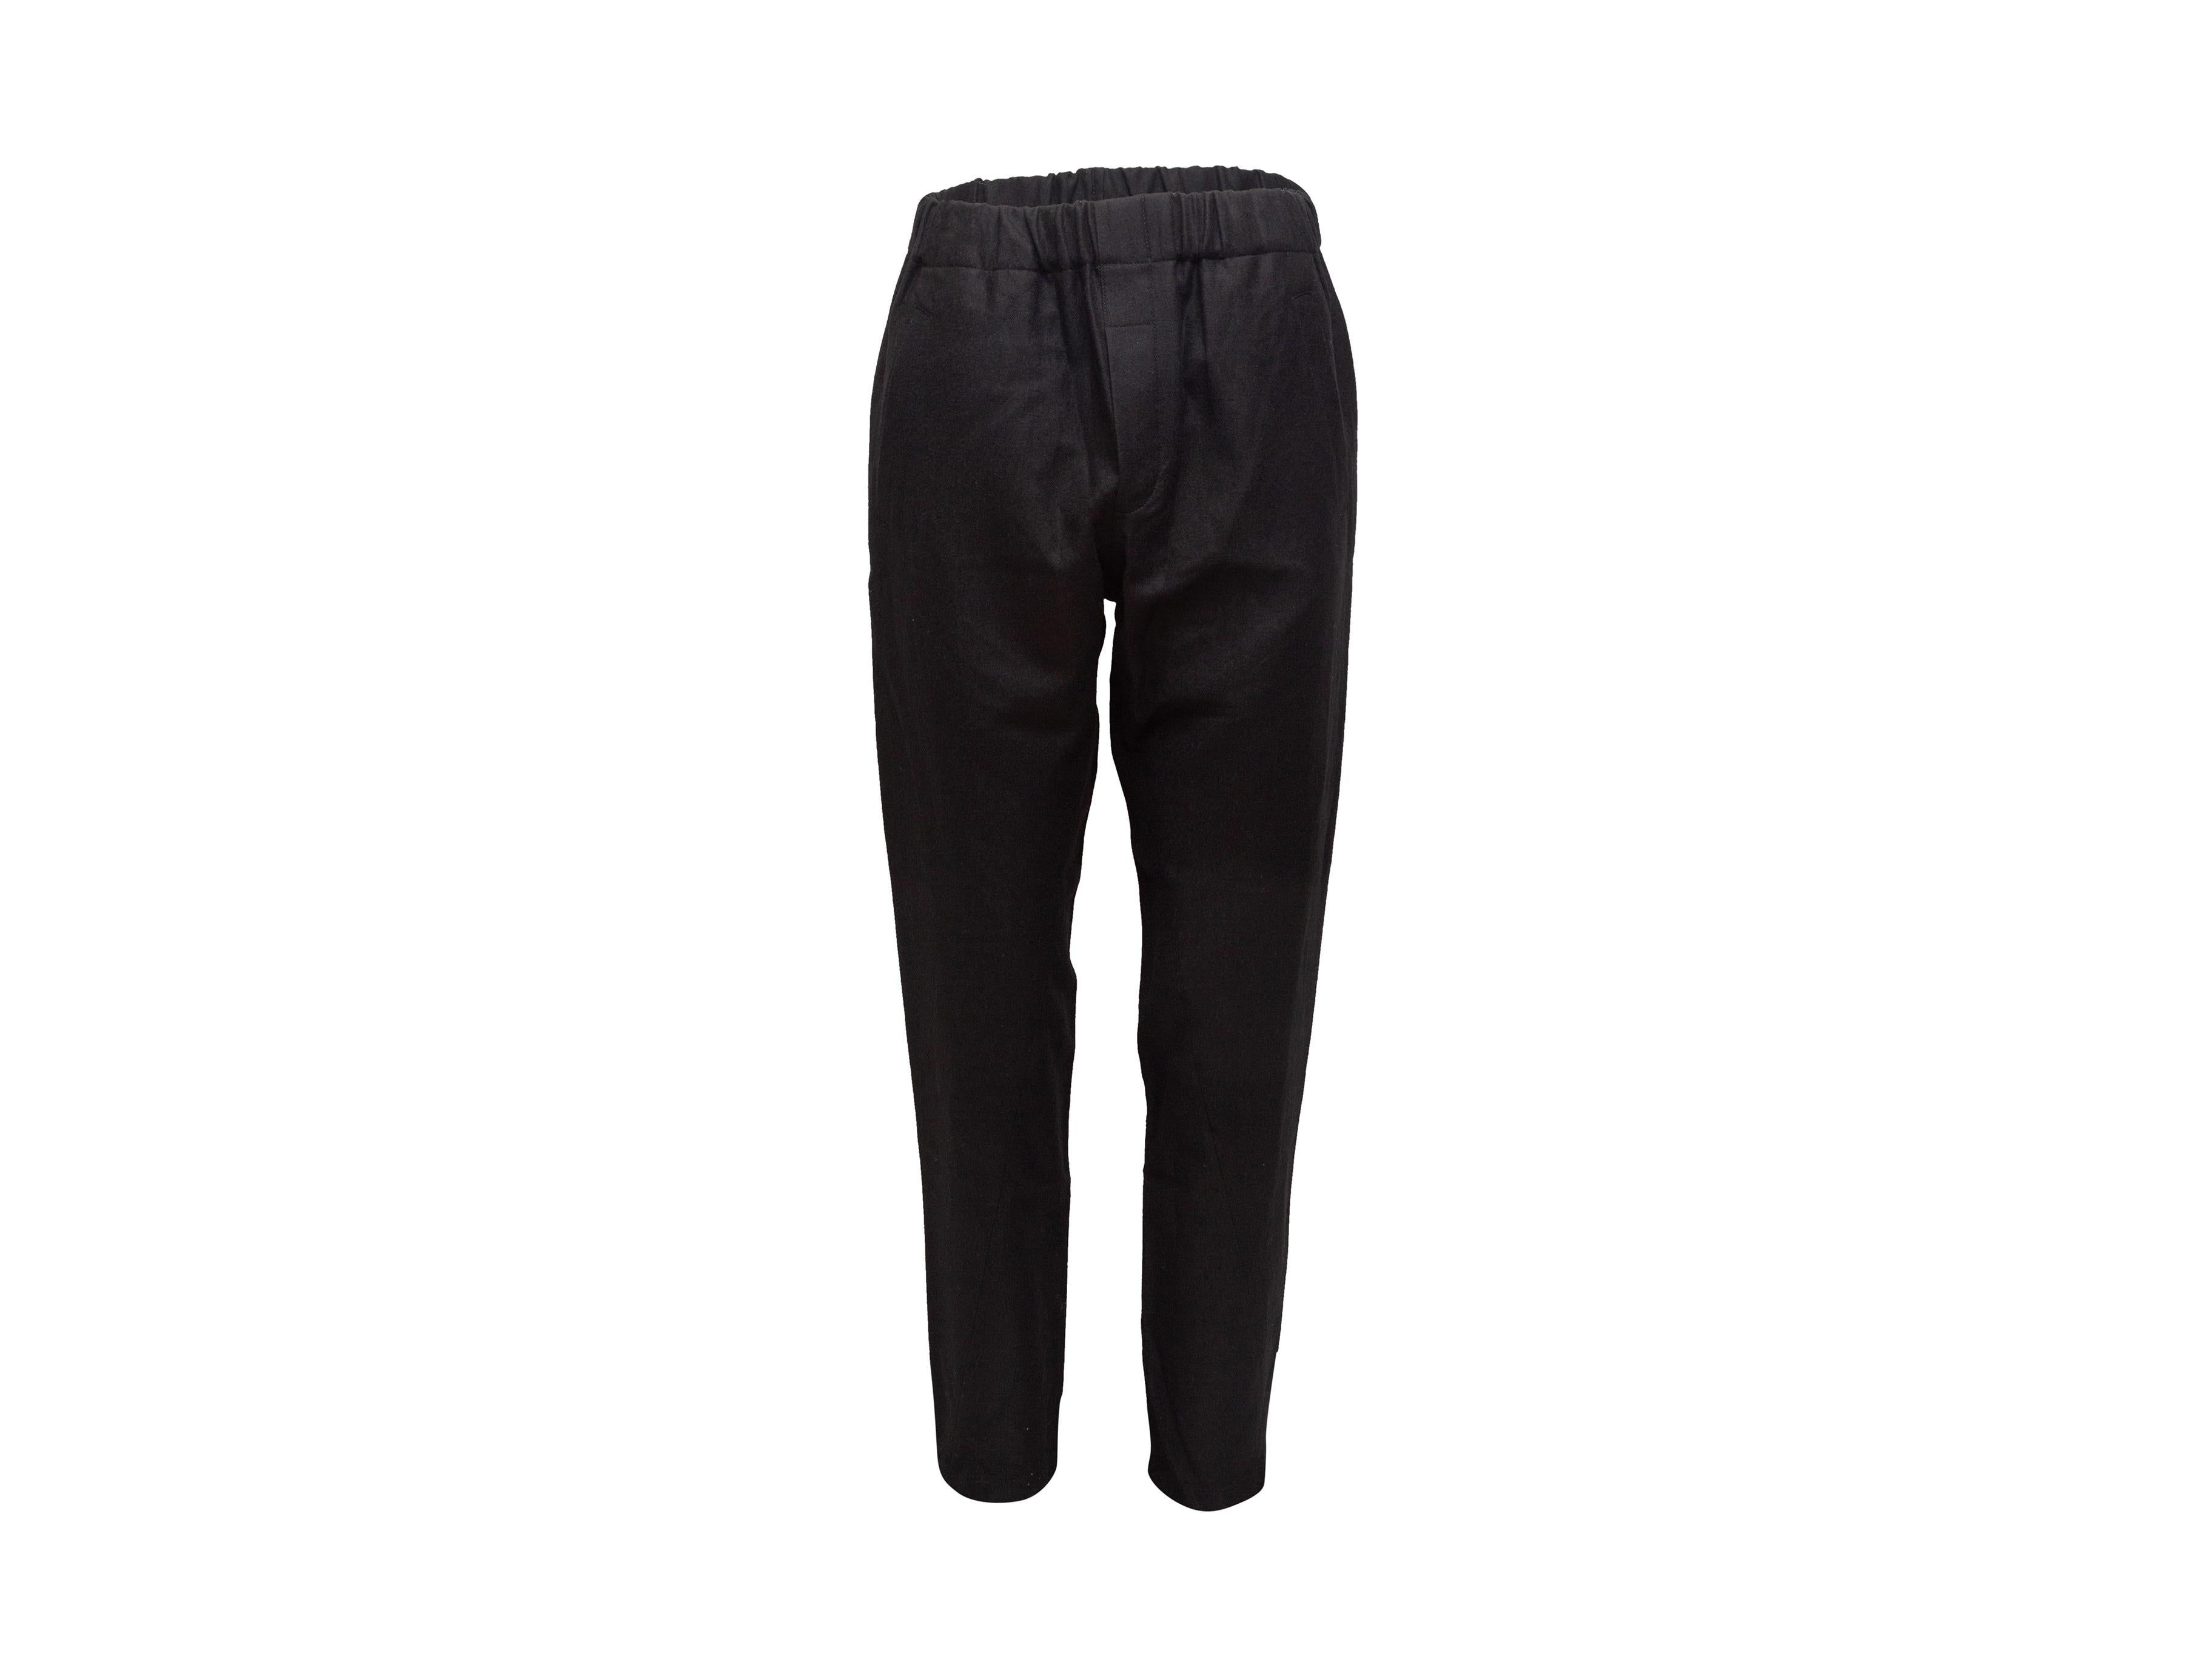 Product details: Black virgin wool pants by Ann Demeulemeester. Elasticized waistband. Dual hip pockets. Dual patch pockets at back. 30